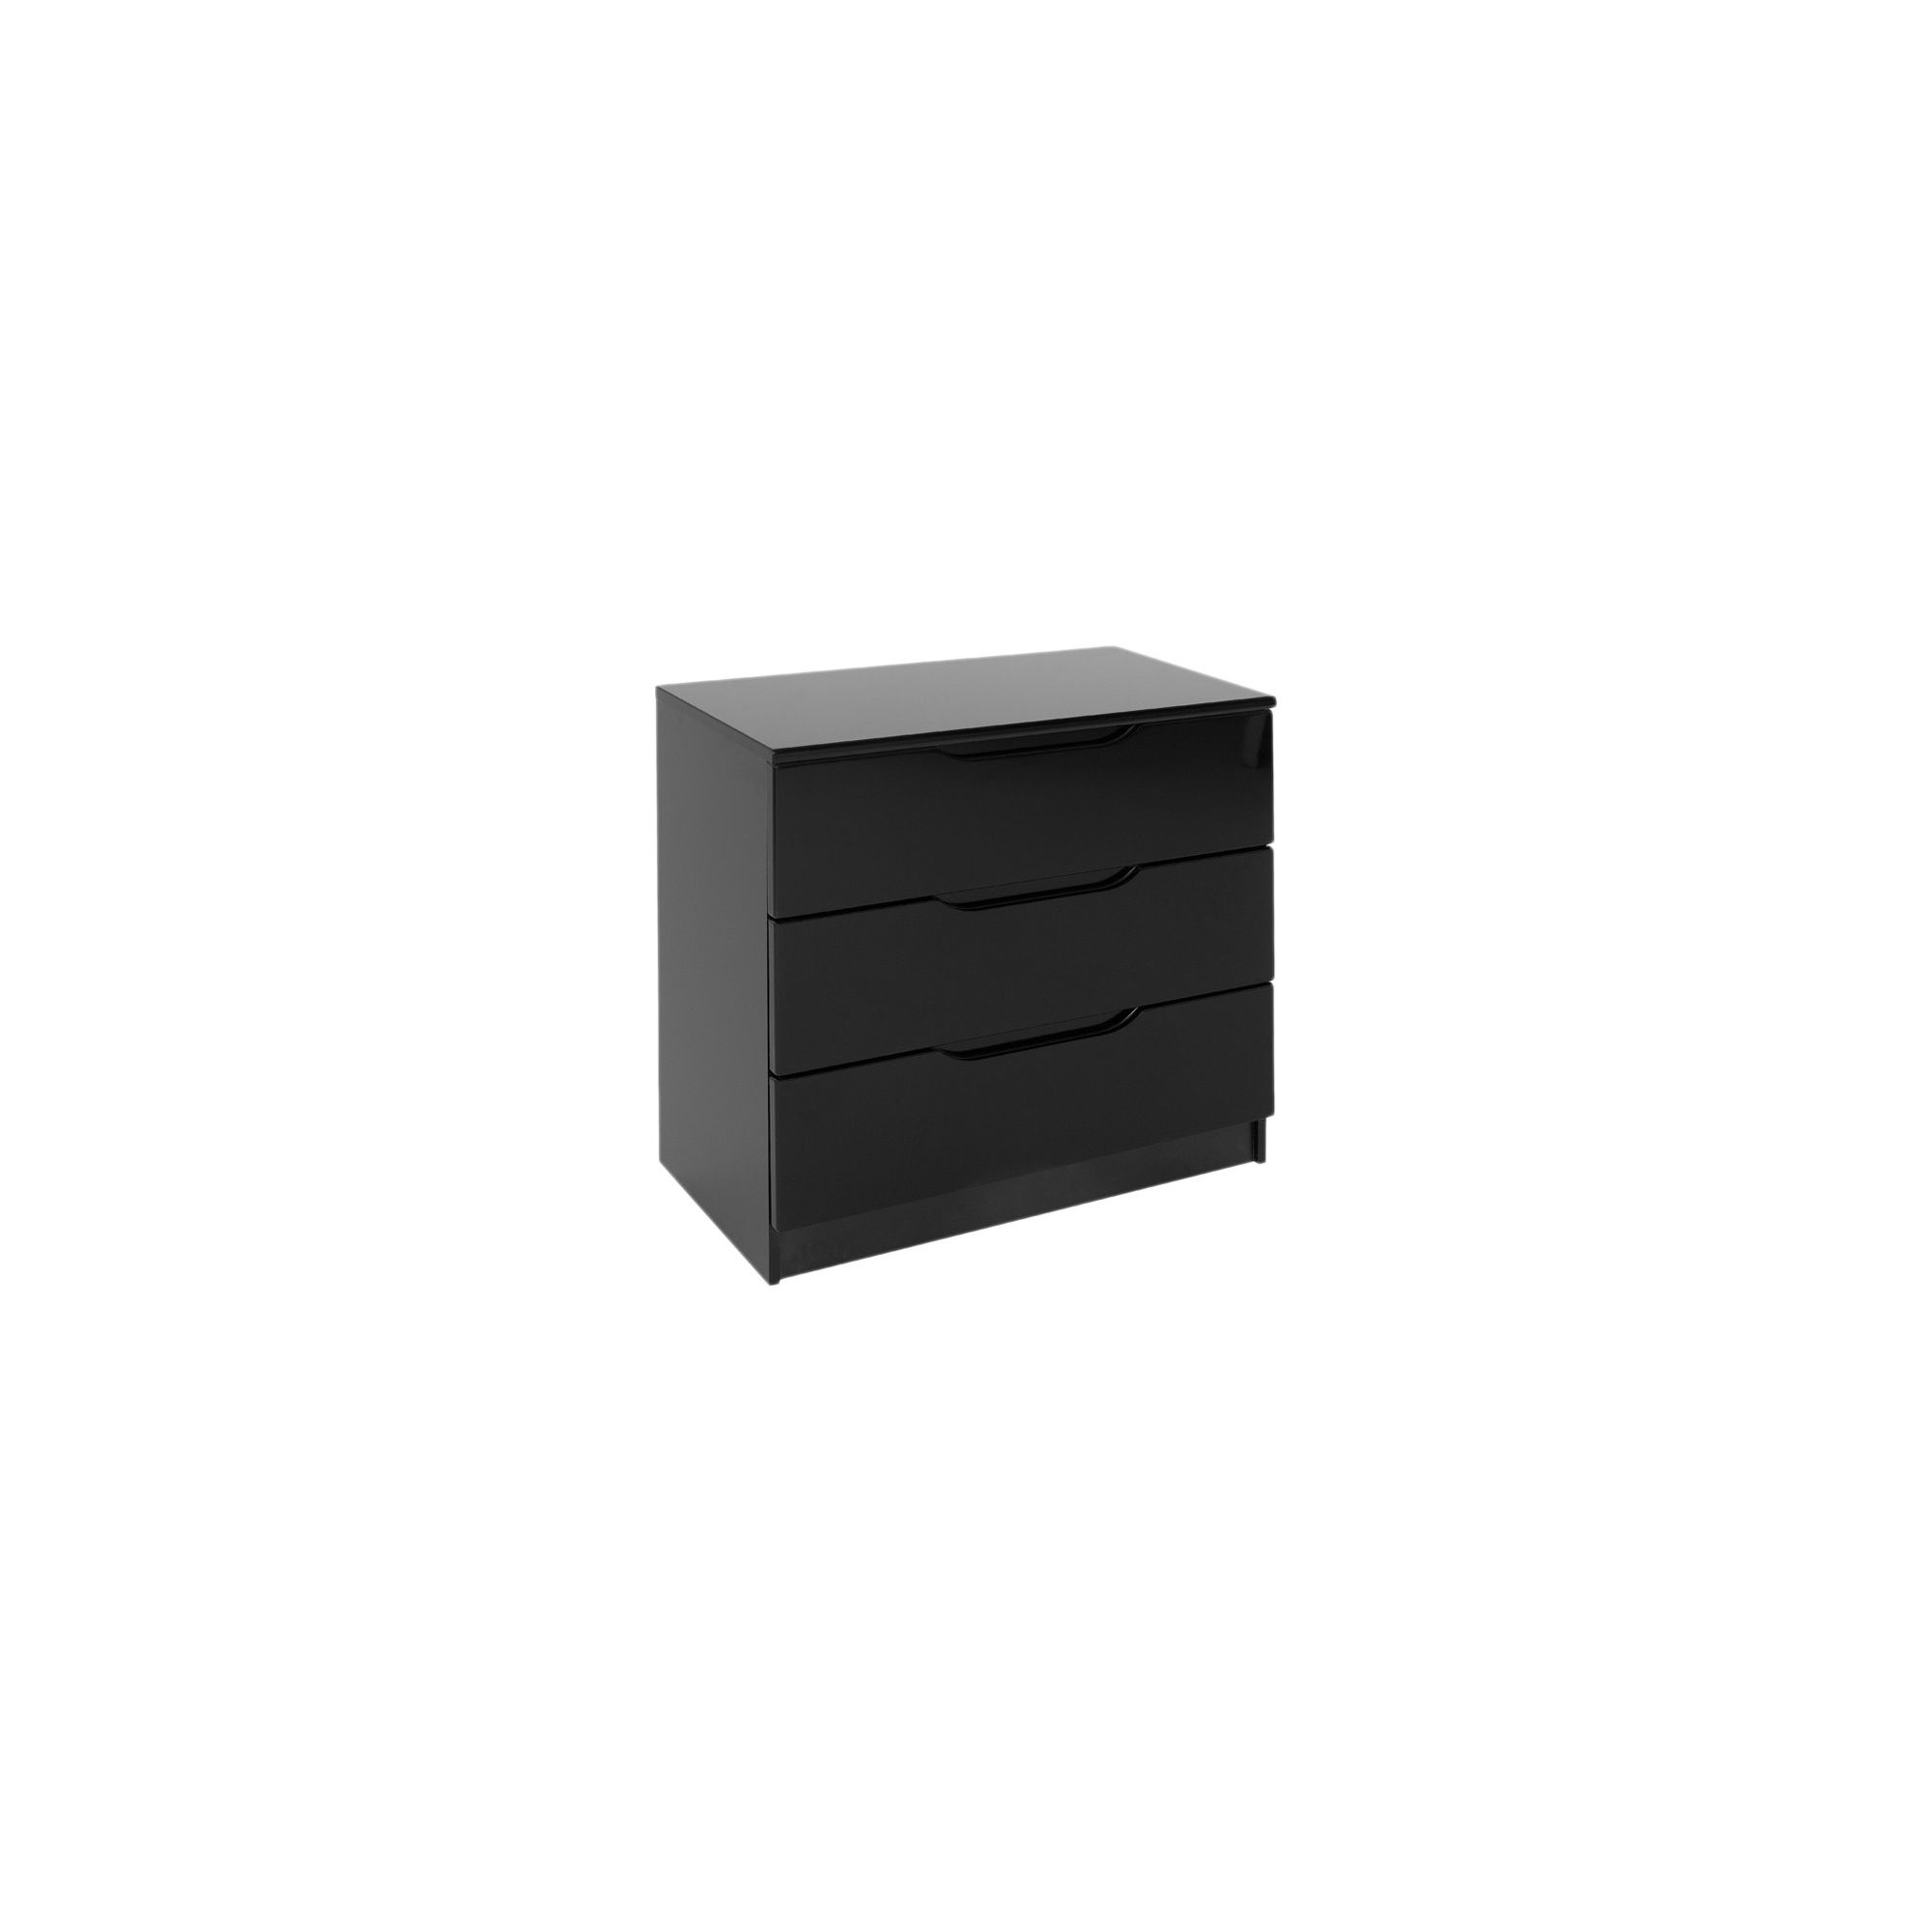 Alto Furniture Visualise Orient 3 Drawer Chest at Tesco Direct